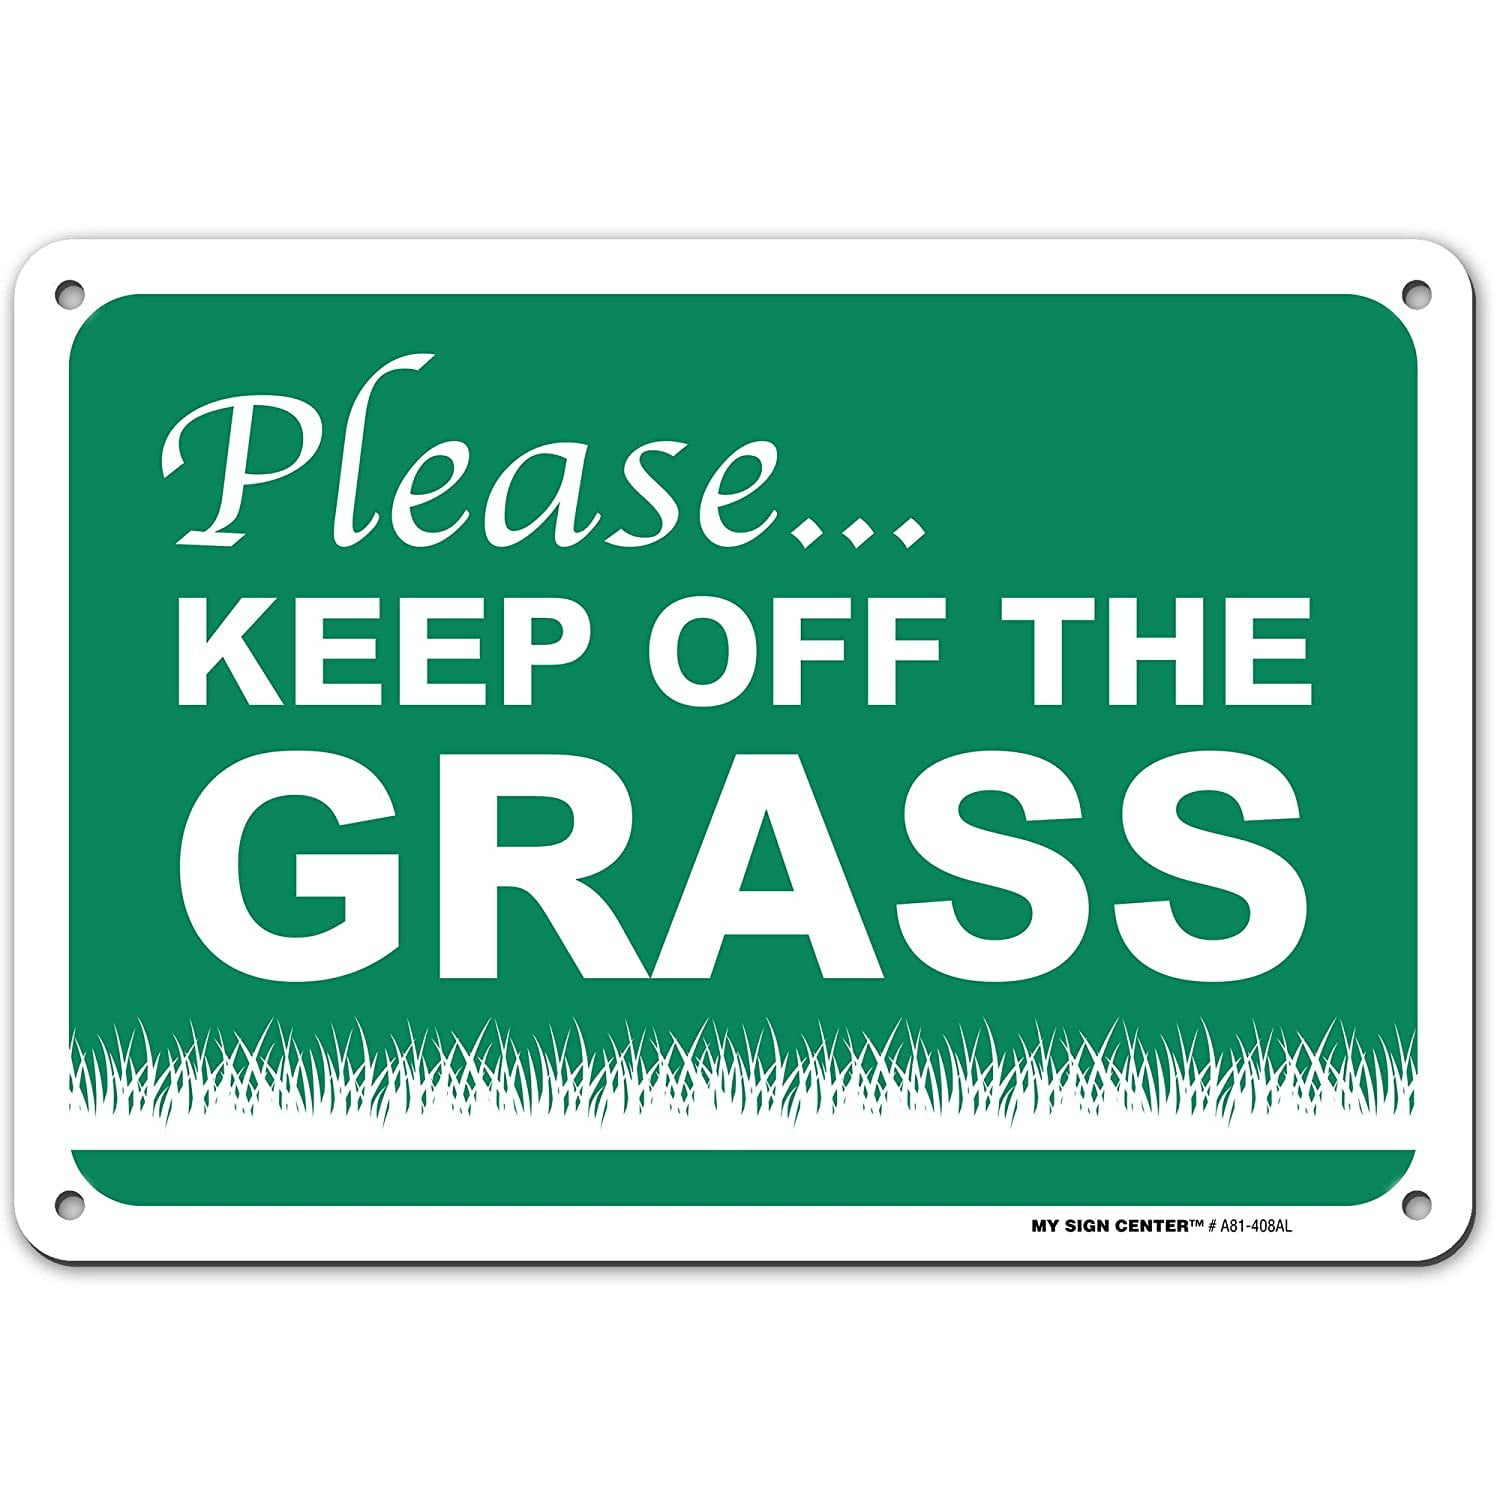 "KEEP OFF THE GRASS" WARNING SIGN METAL HEAVY DUTY 